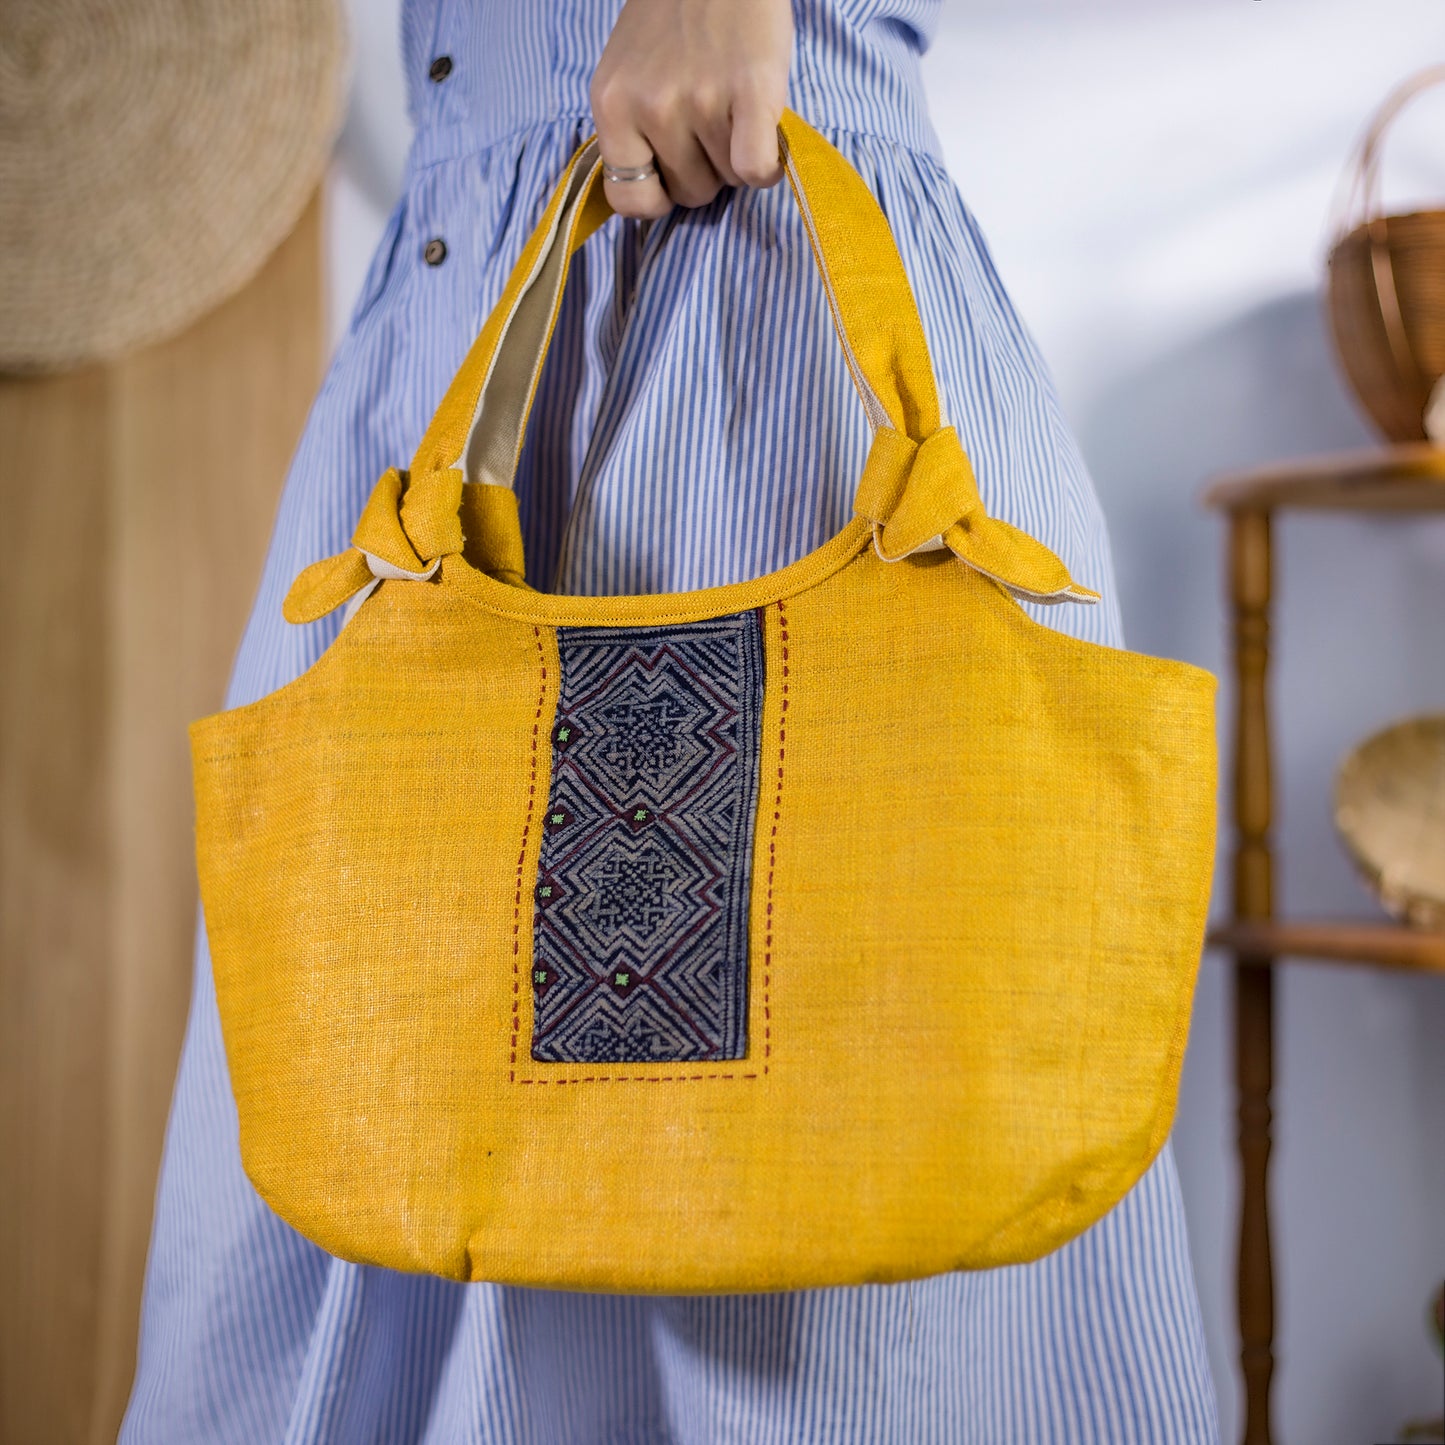 Bunny ear handbag, natural hemp in YELLOW with vintage patch